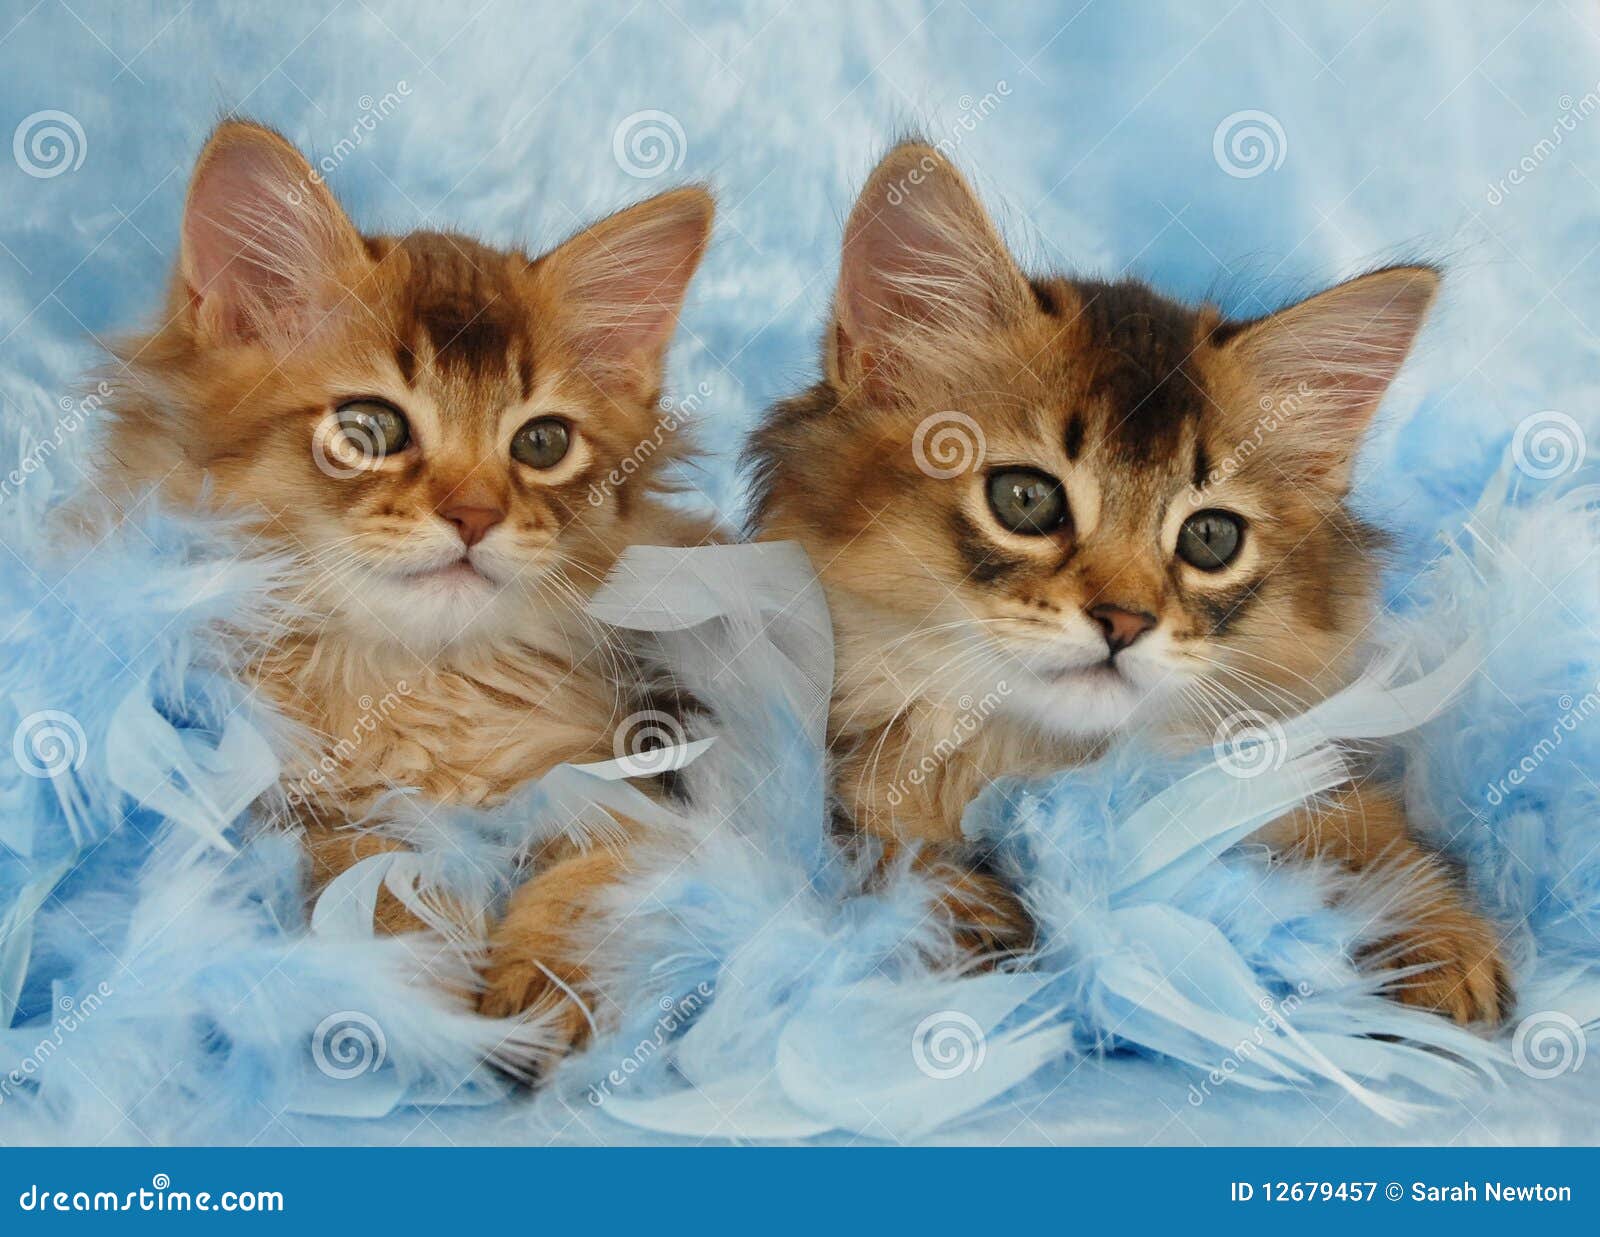 Somali Kittens Relaxing In Blue Feathers Stock Image ...